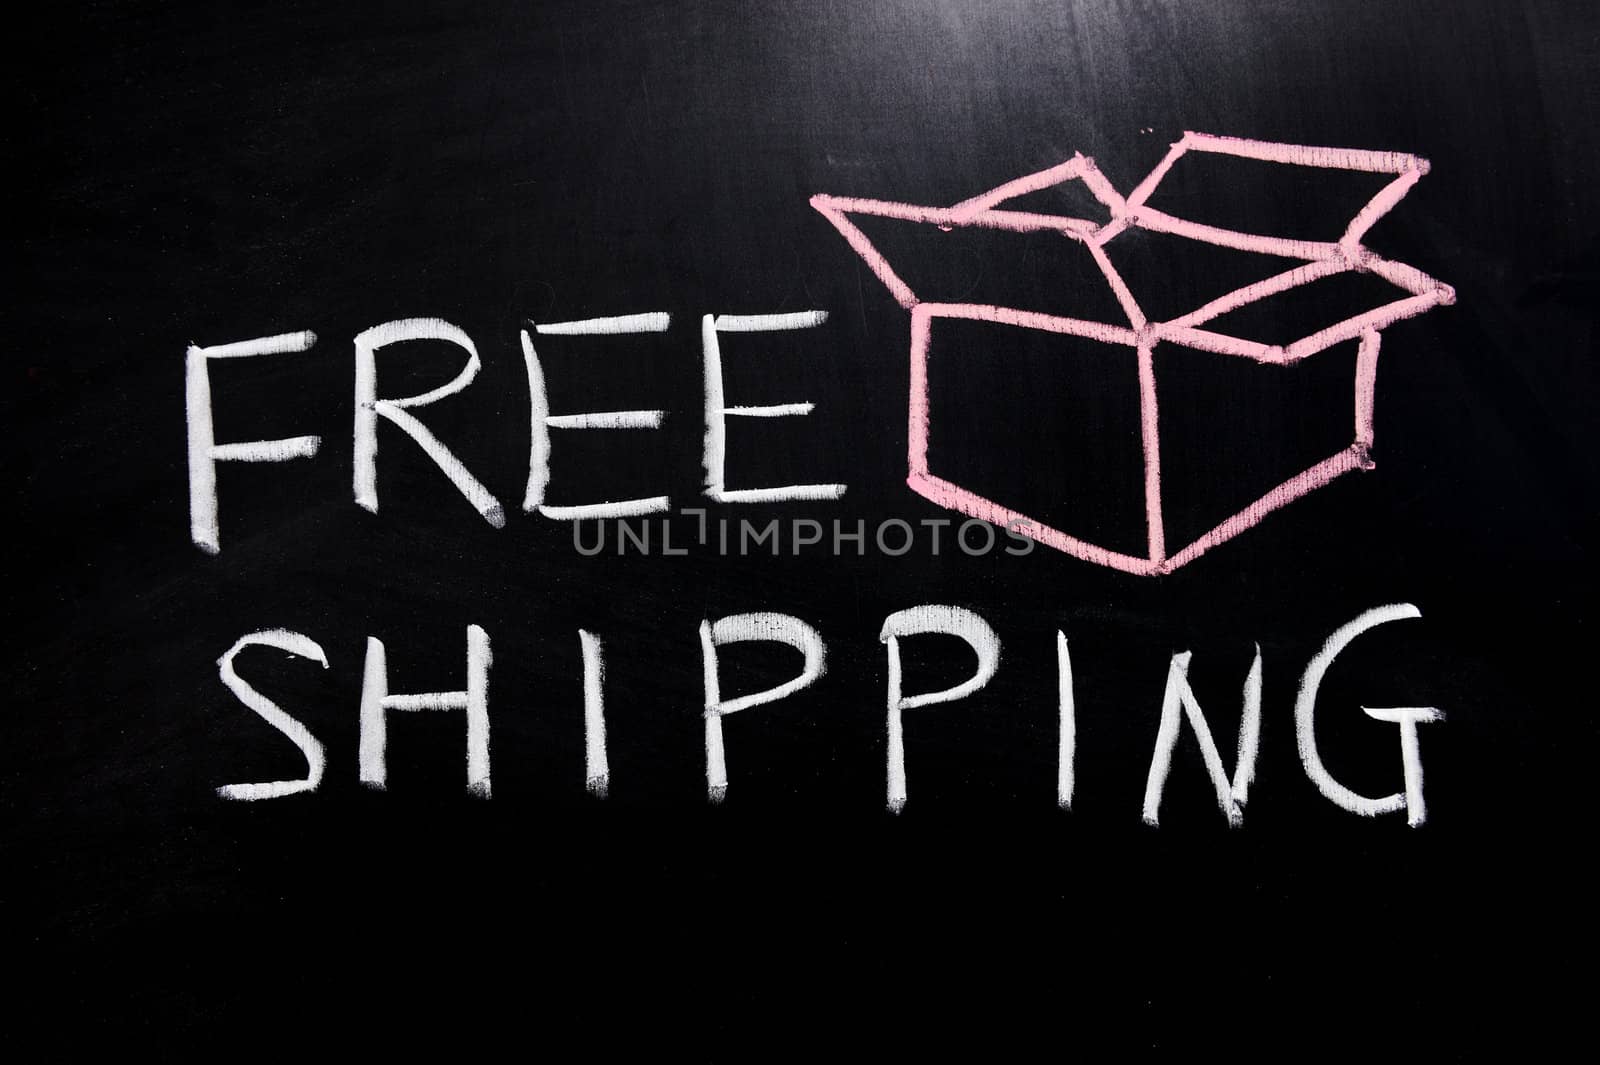 Chalk drawing - Free shipping text and an open box